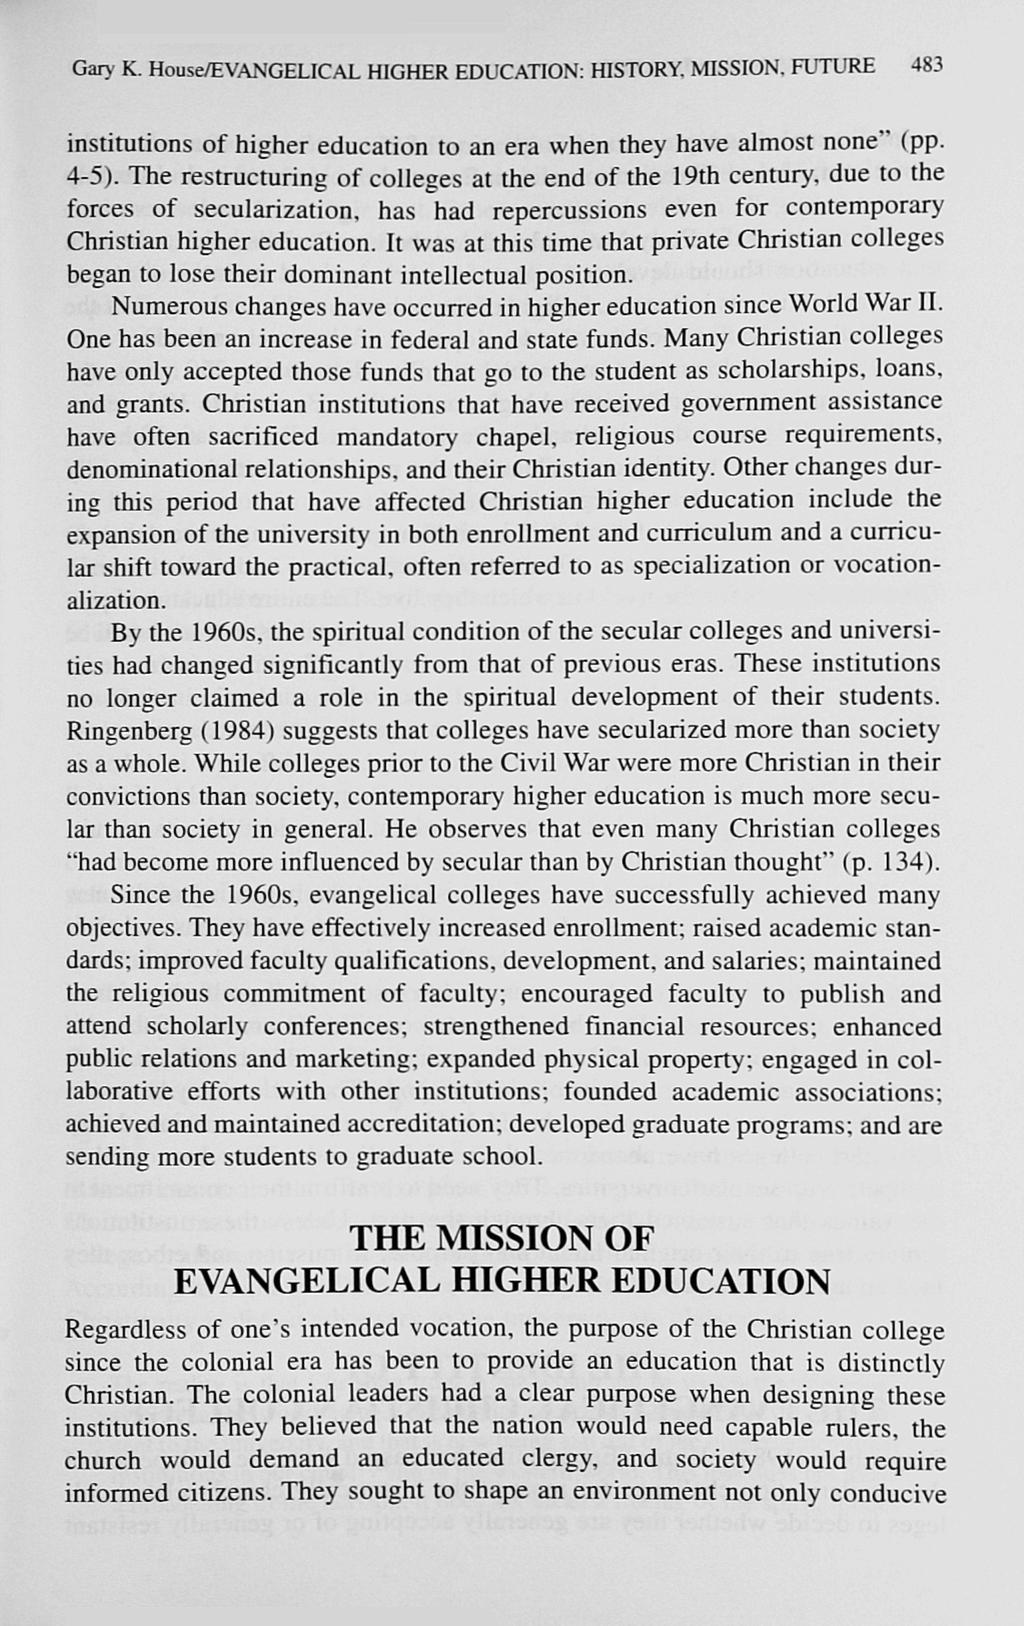 Gar>' K. House/EVANGELICAL HIGHER EDUCATION: HISTORY. MISSION. FUTURE 483 institutions of higher education to an era when they have almost none" (pp. 4-5).